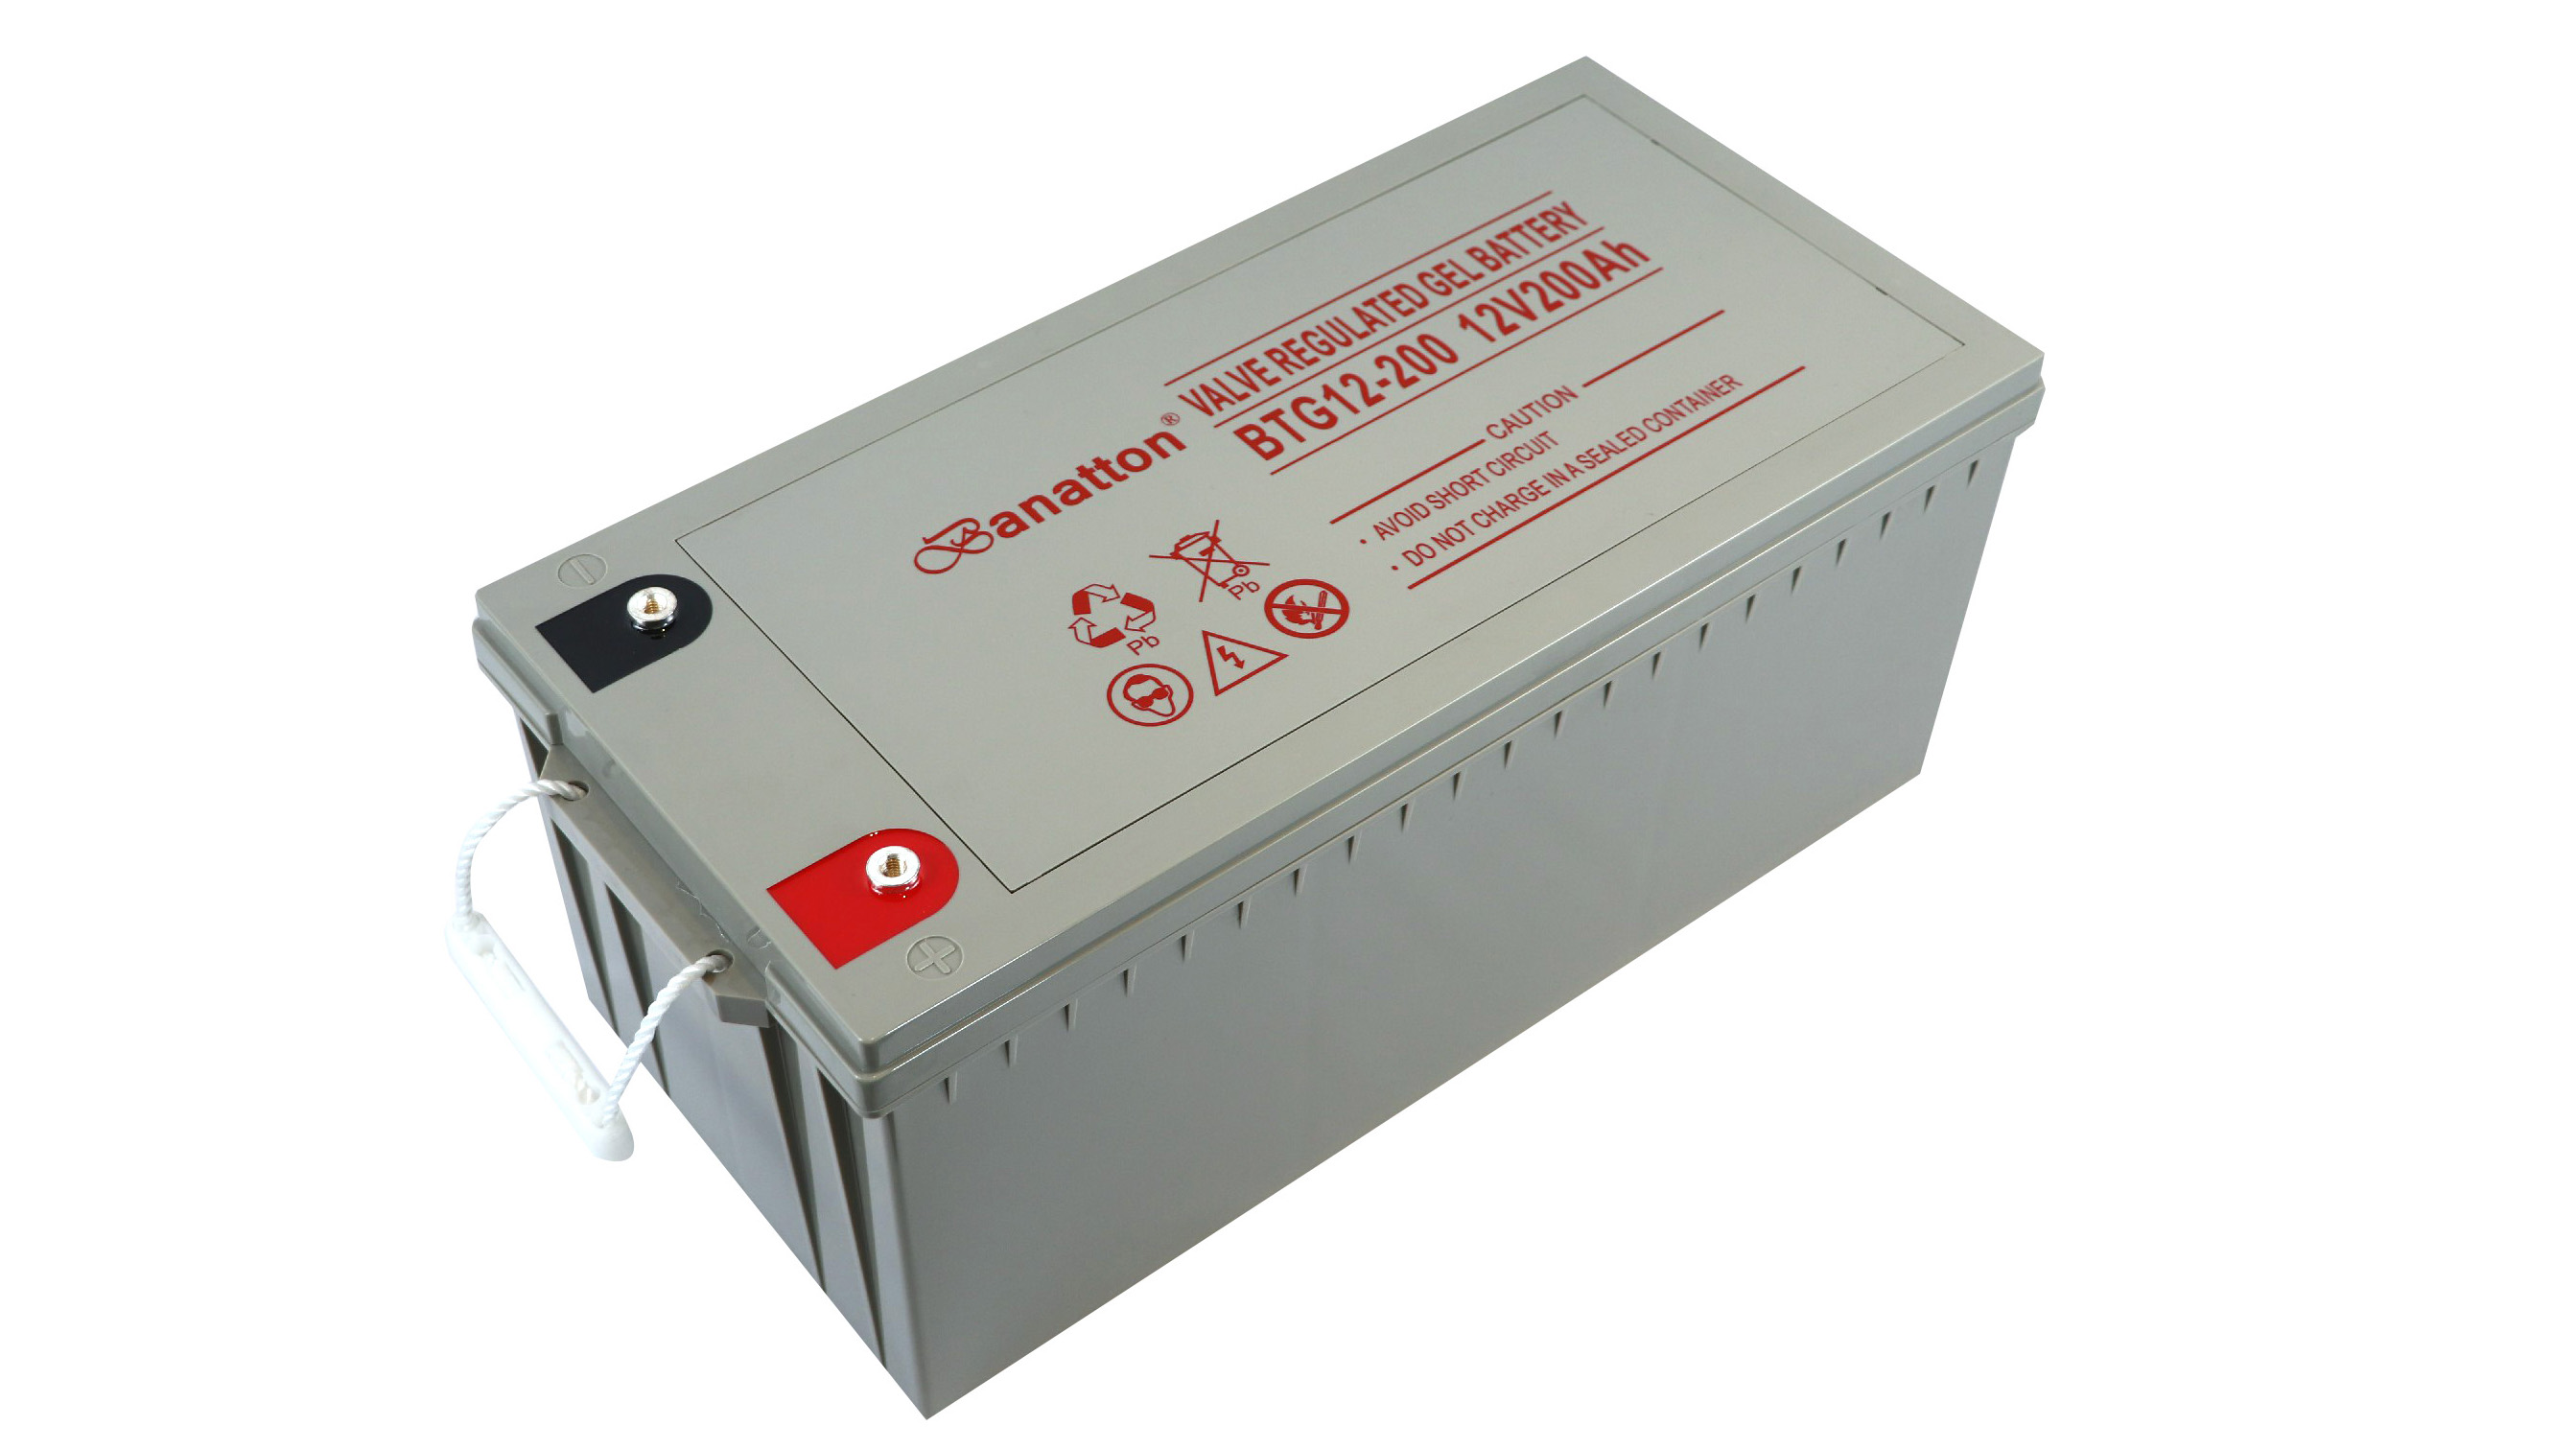 Best Deep Cycle Series battery Factory Price-Banatton